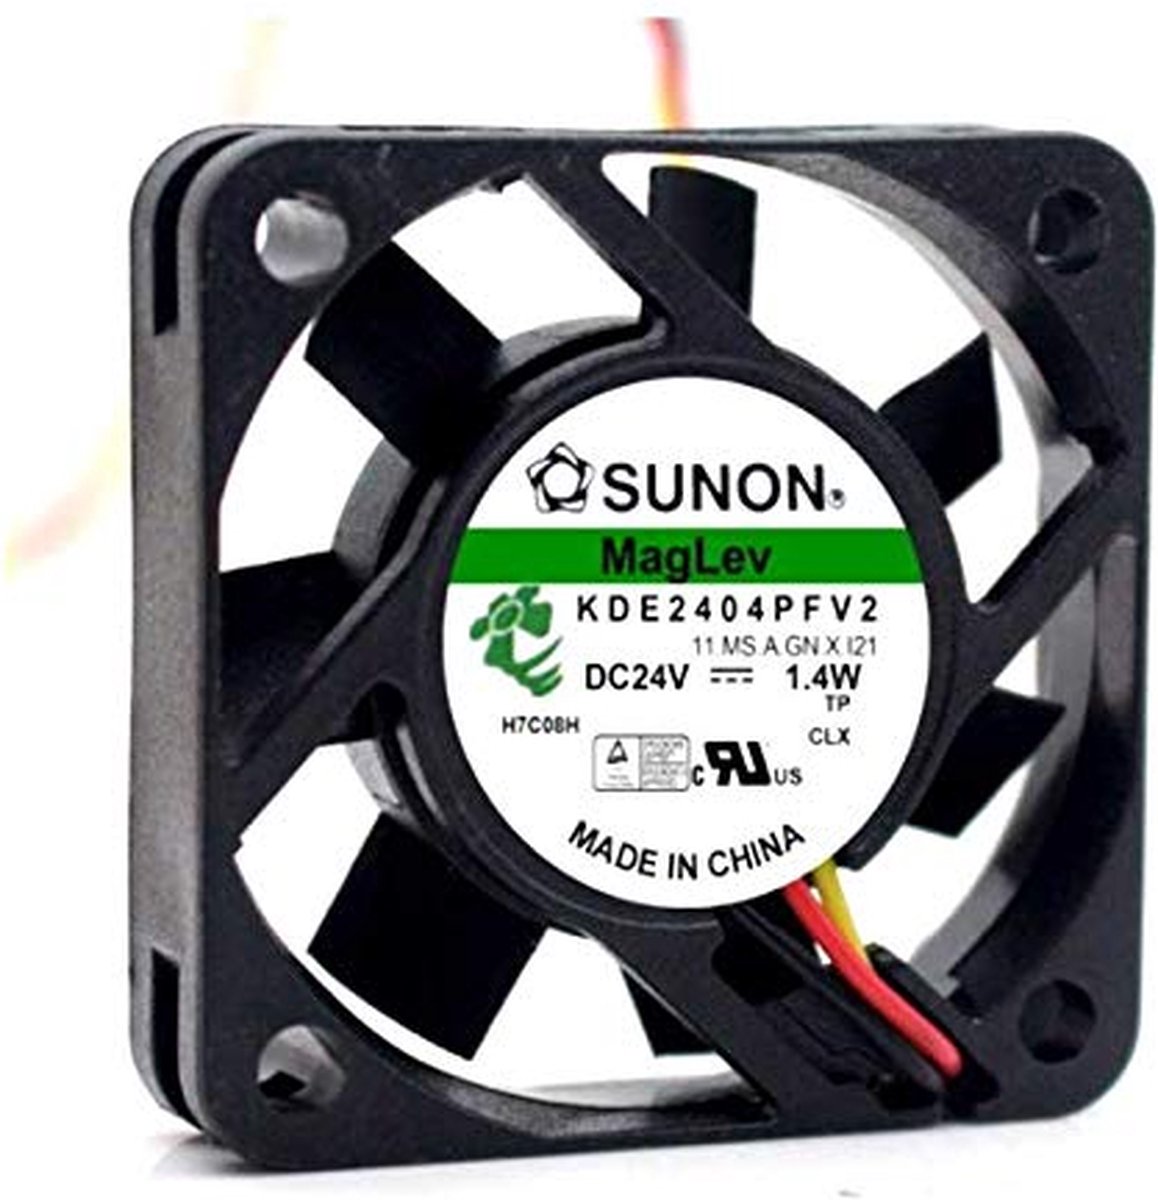 Protech3D – Sunon Small Silent cooling maglev fan 4010